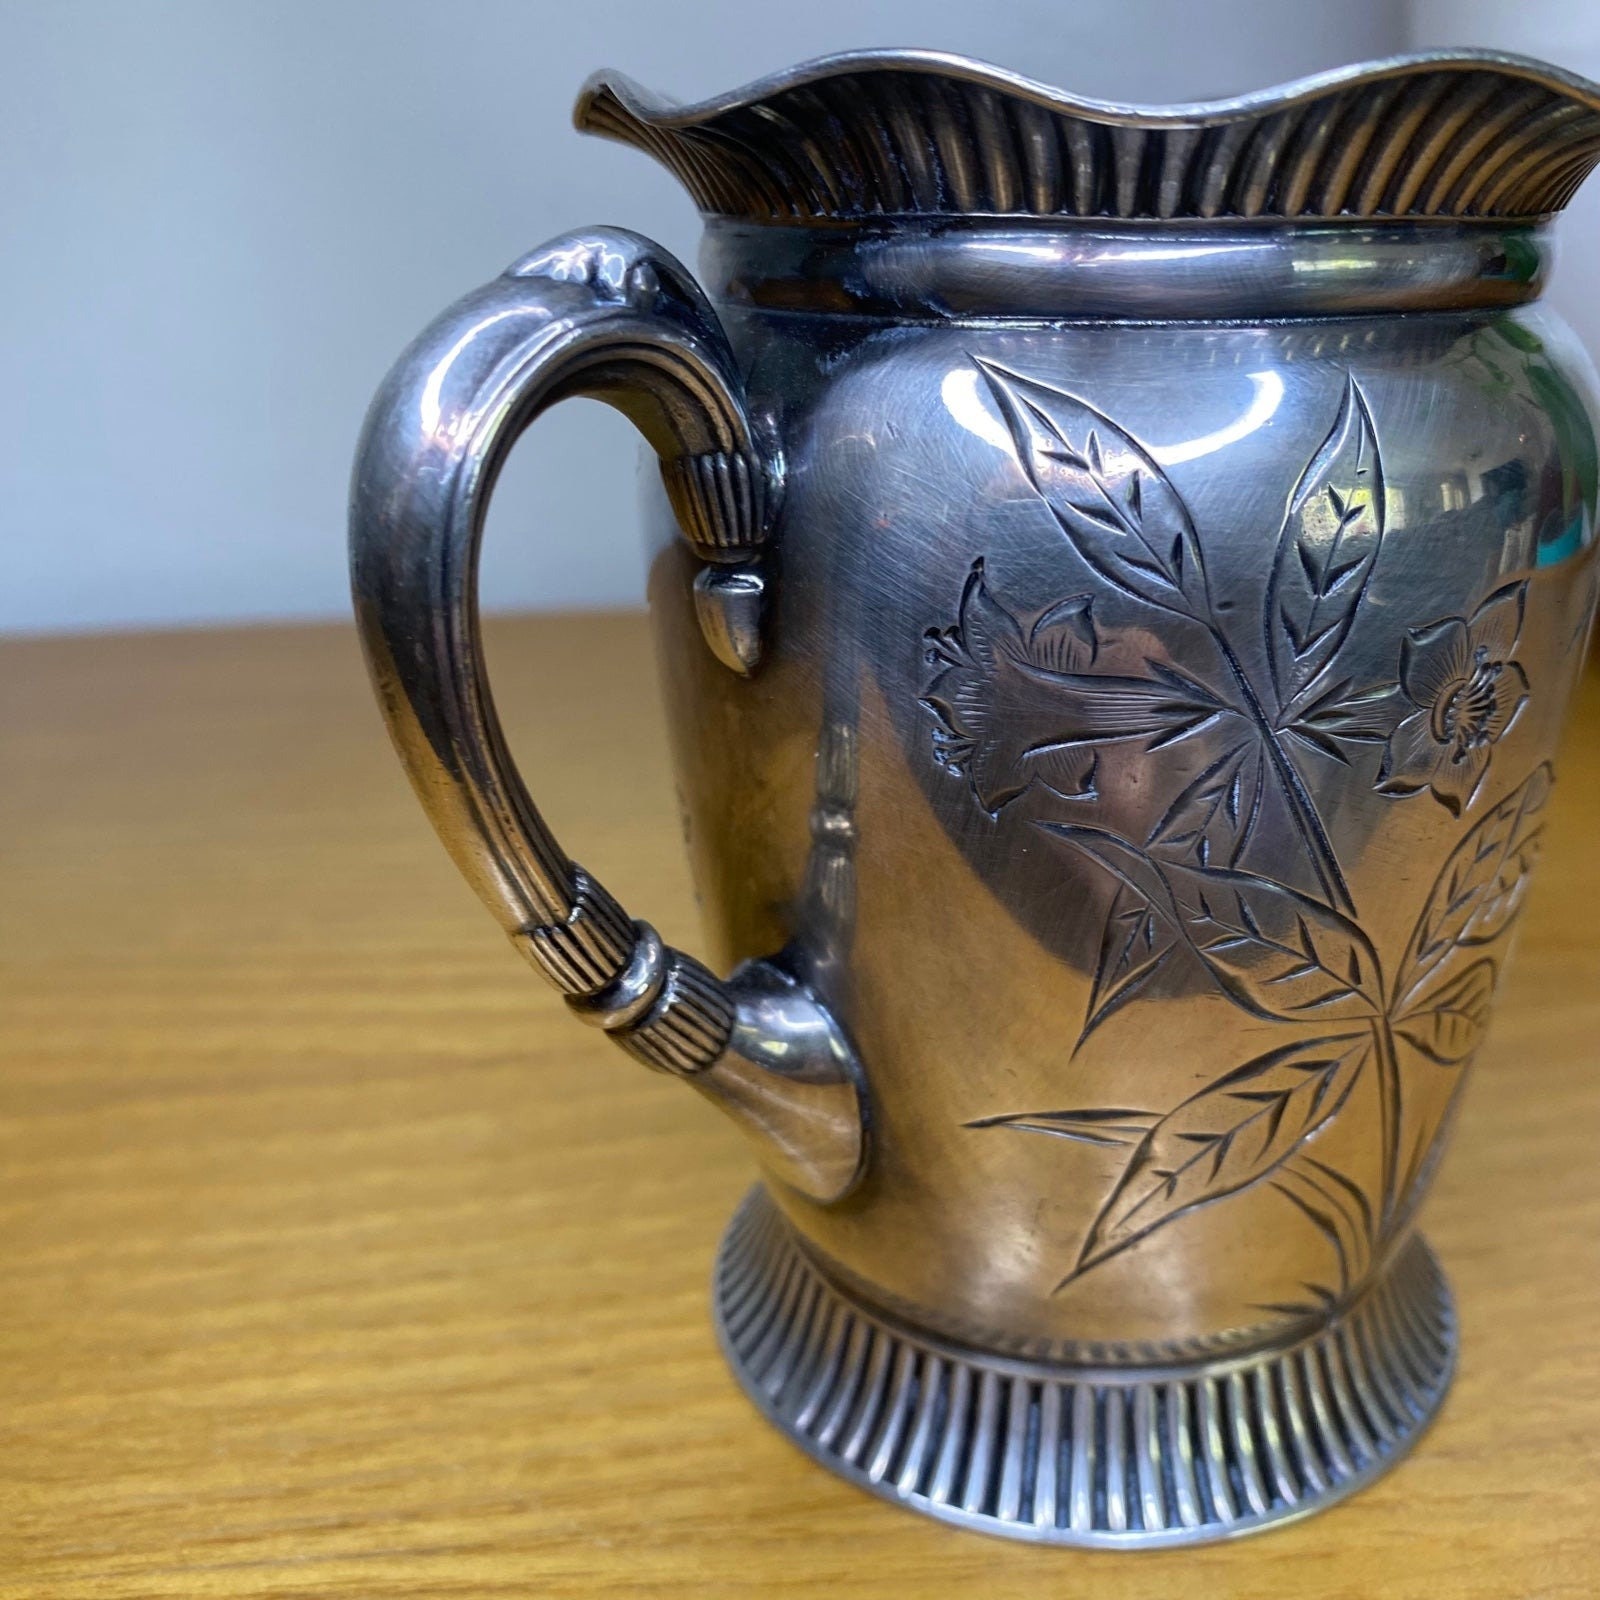 Late 19th Century Pelton Brothers & Co. Silver Plate Cup With Floral Motif